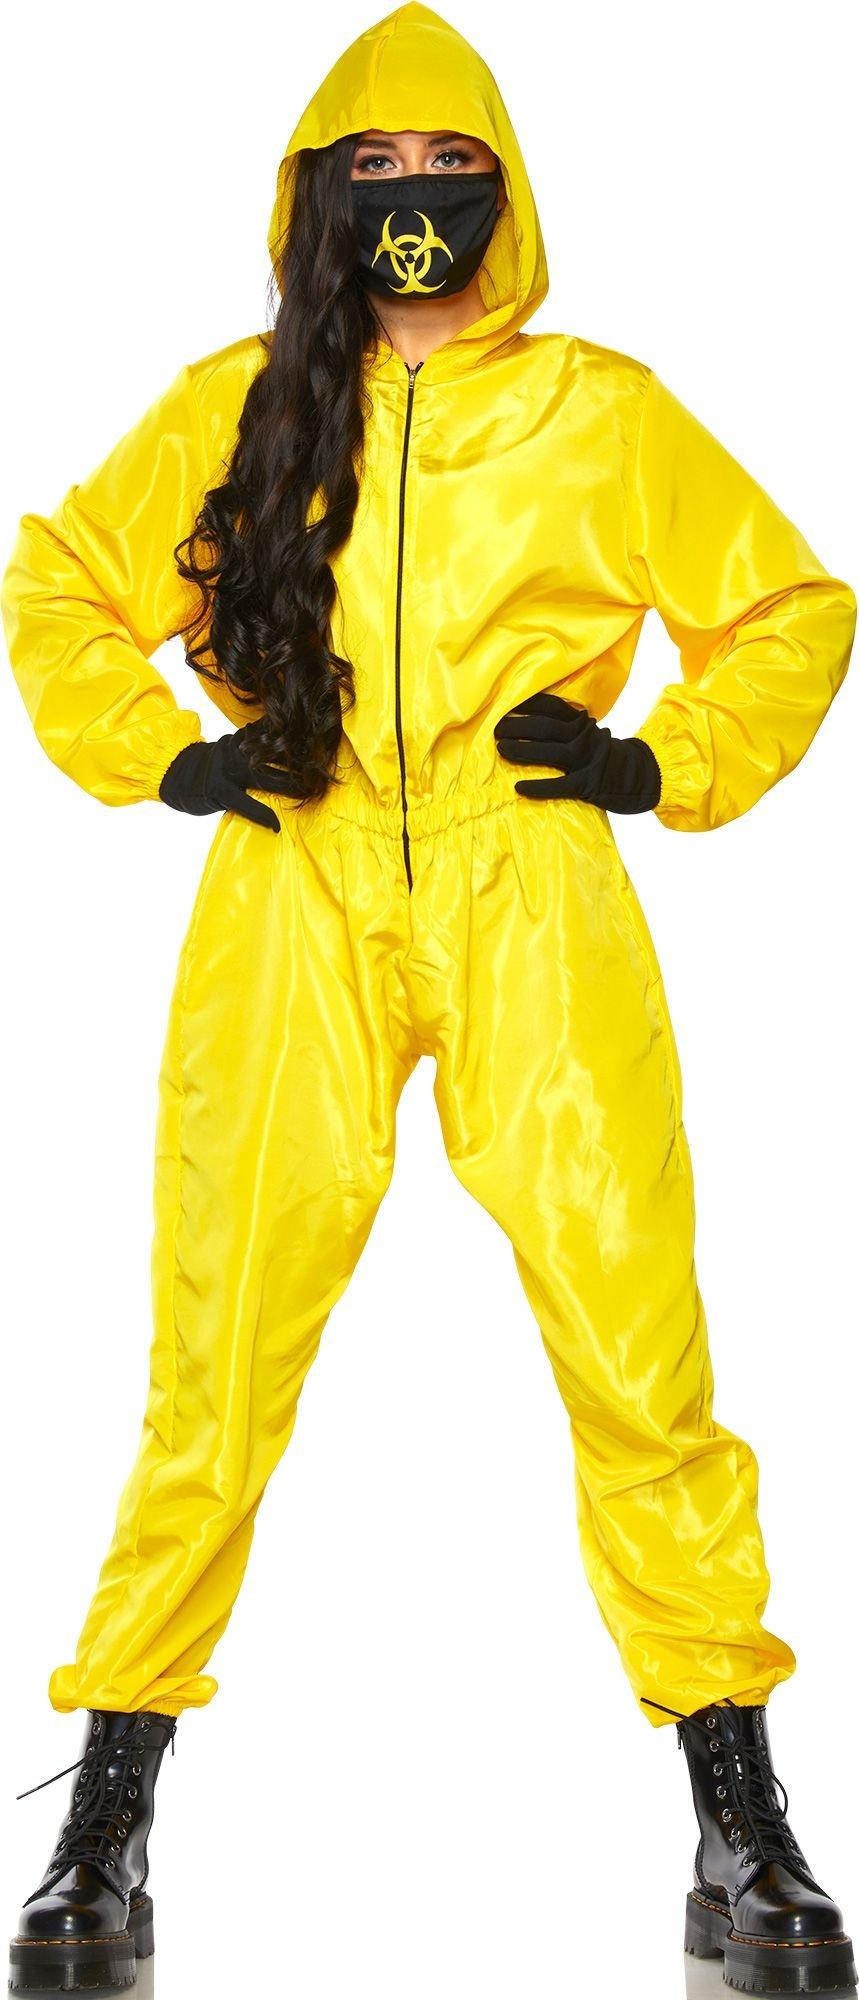 Radioactive Hazmat Suit Costume for Adults | Party City